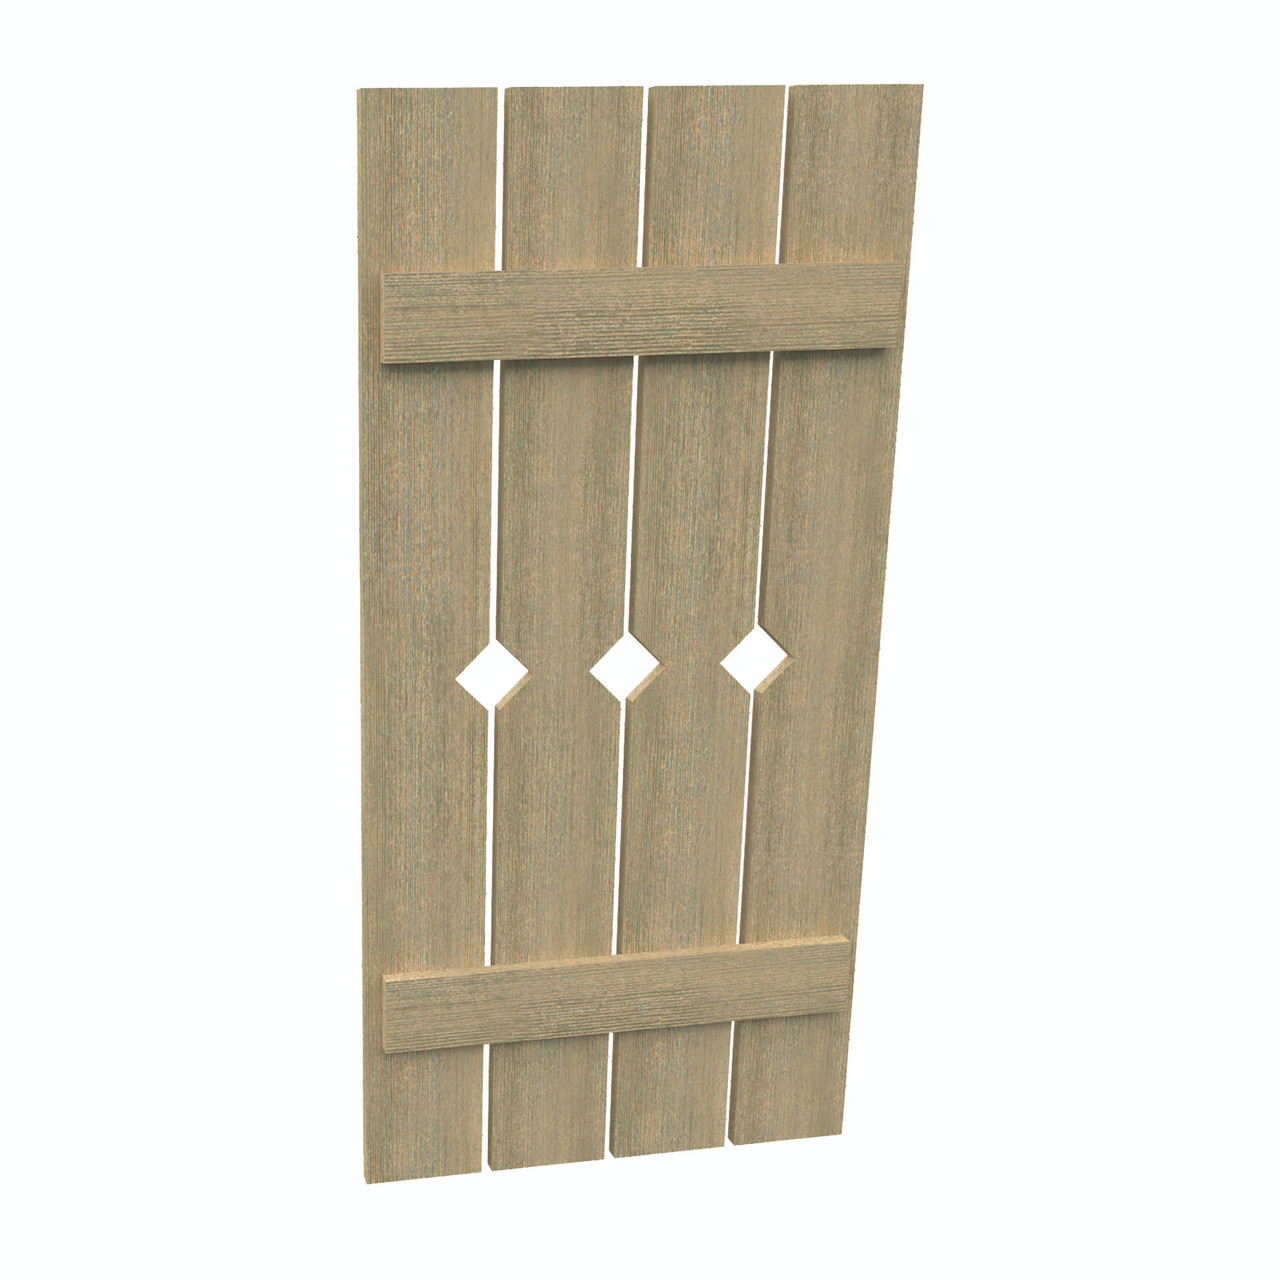 24 inch by 57 inch Plank Shutter with 4-Plank, Diamond